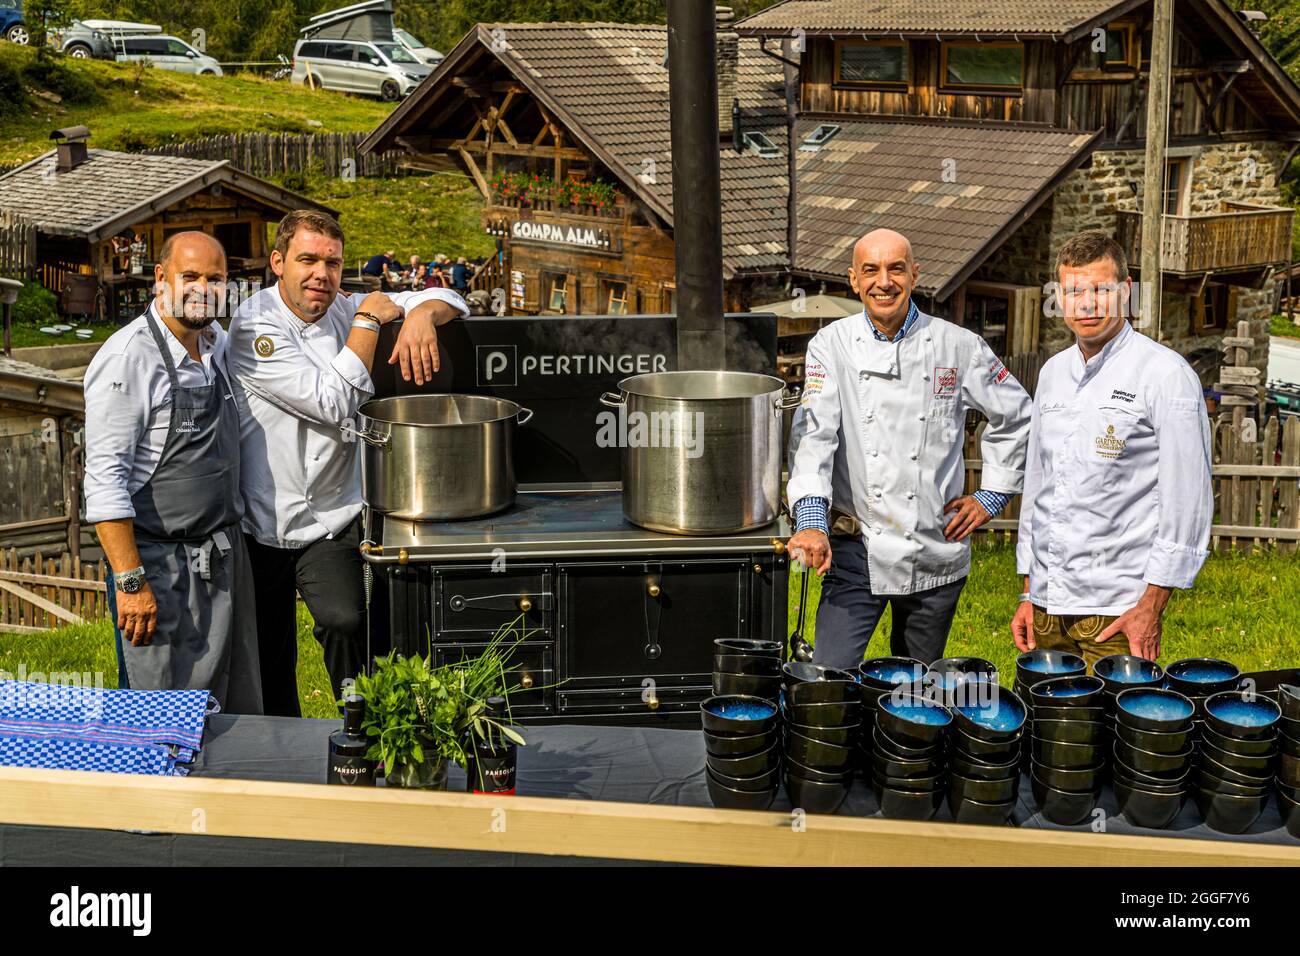 Unplugged Taste is the name of the gourmet event at the Gompm-Alm in South Tyrol, Italy. It takes place every year on the last Sunday in August. Famous chefs prepare their dishes on old wood stoves. Stock Photo